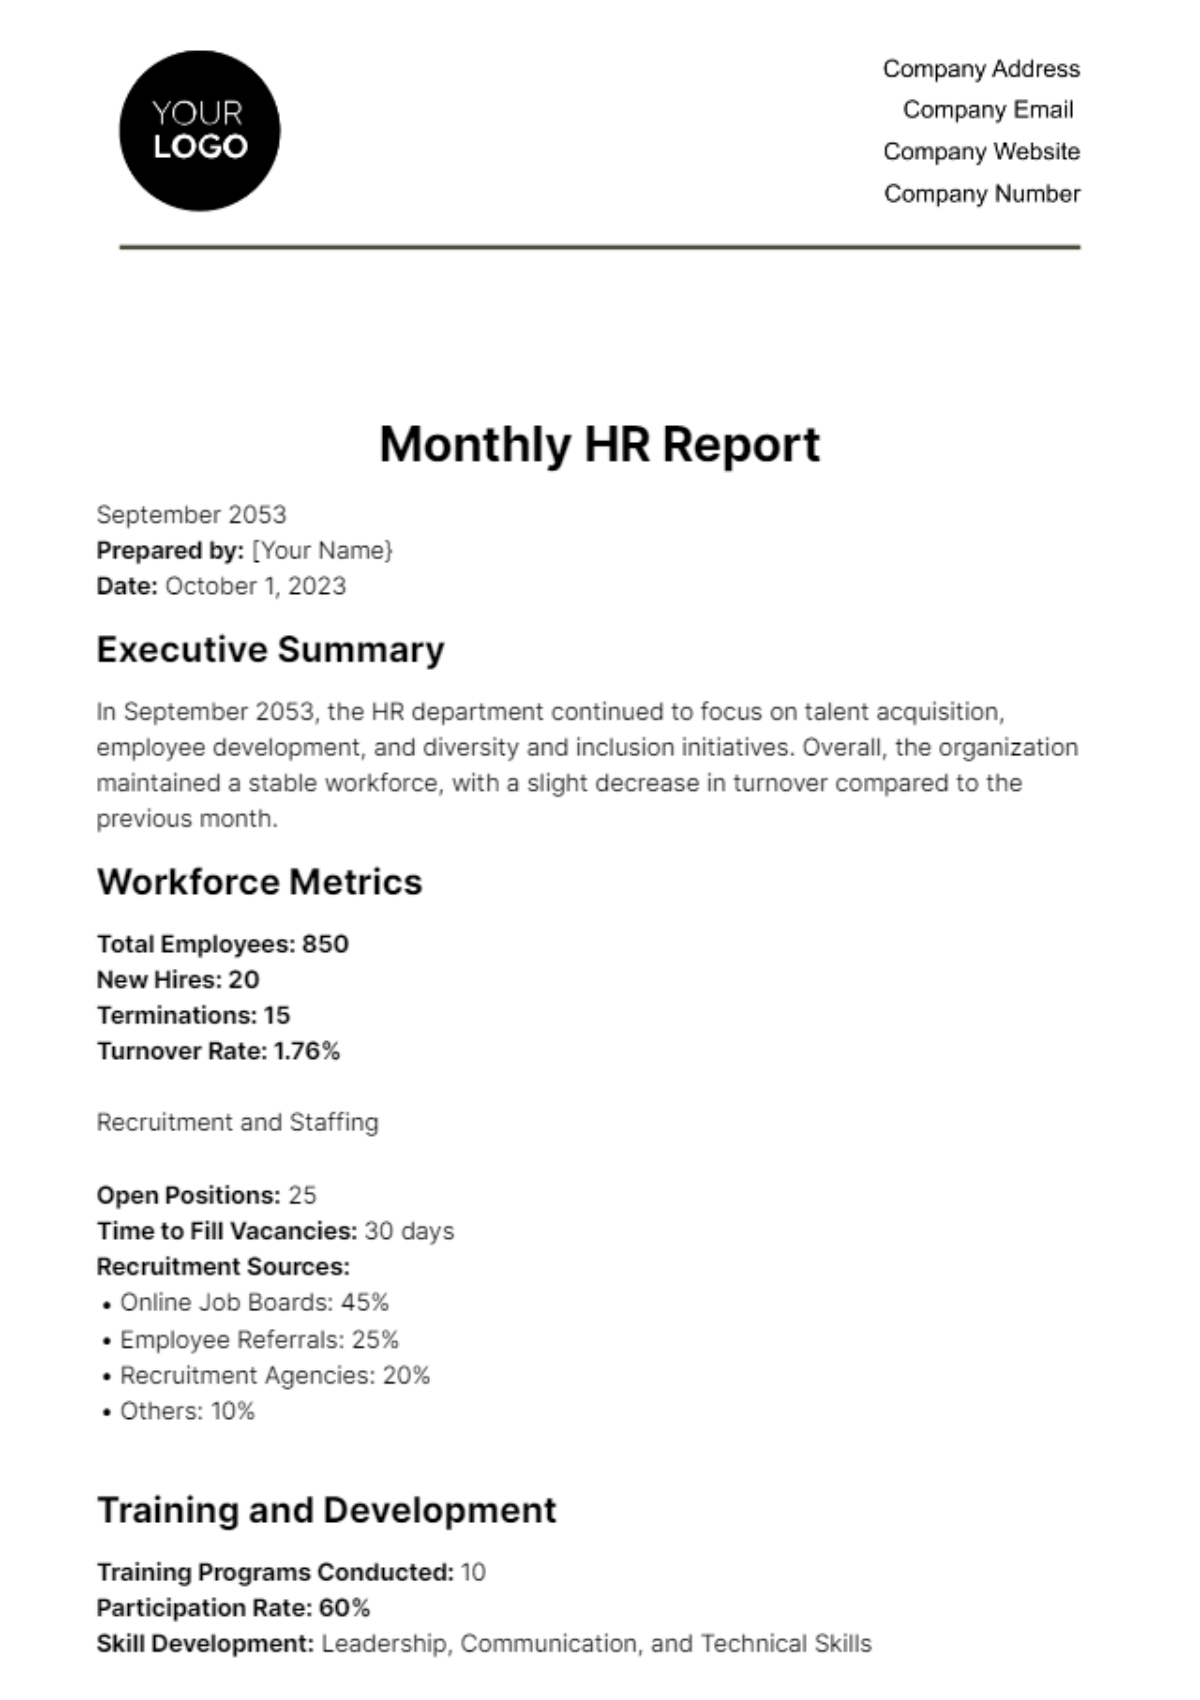 Free Monthly HR Report Template